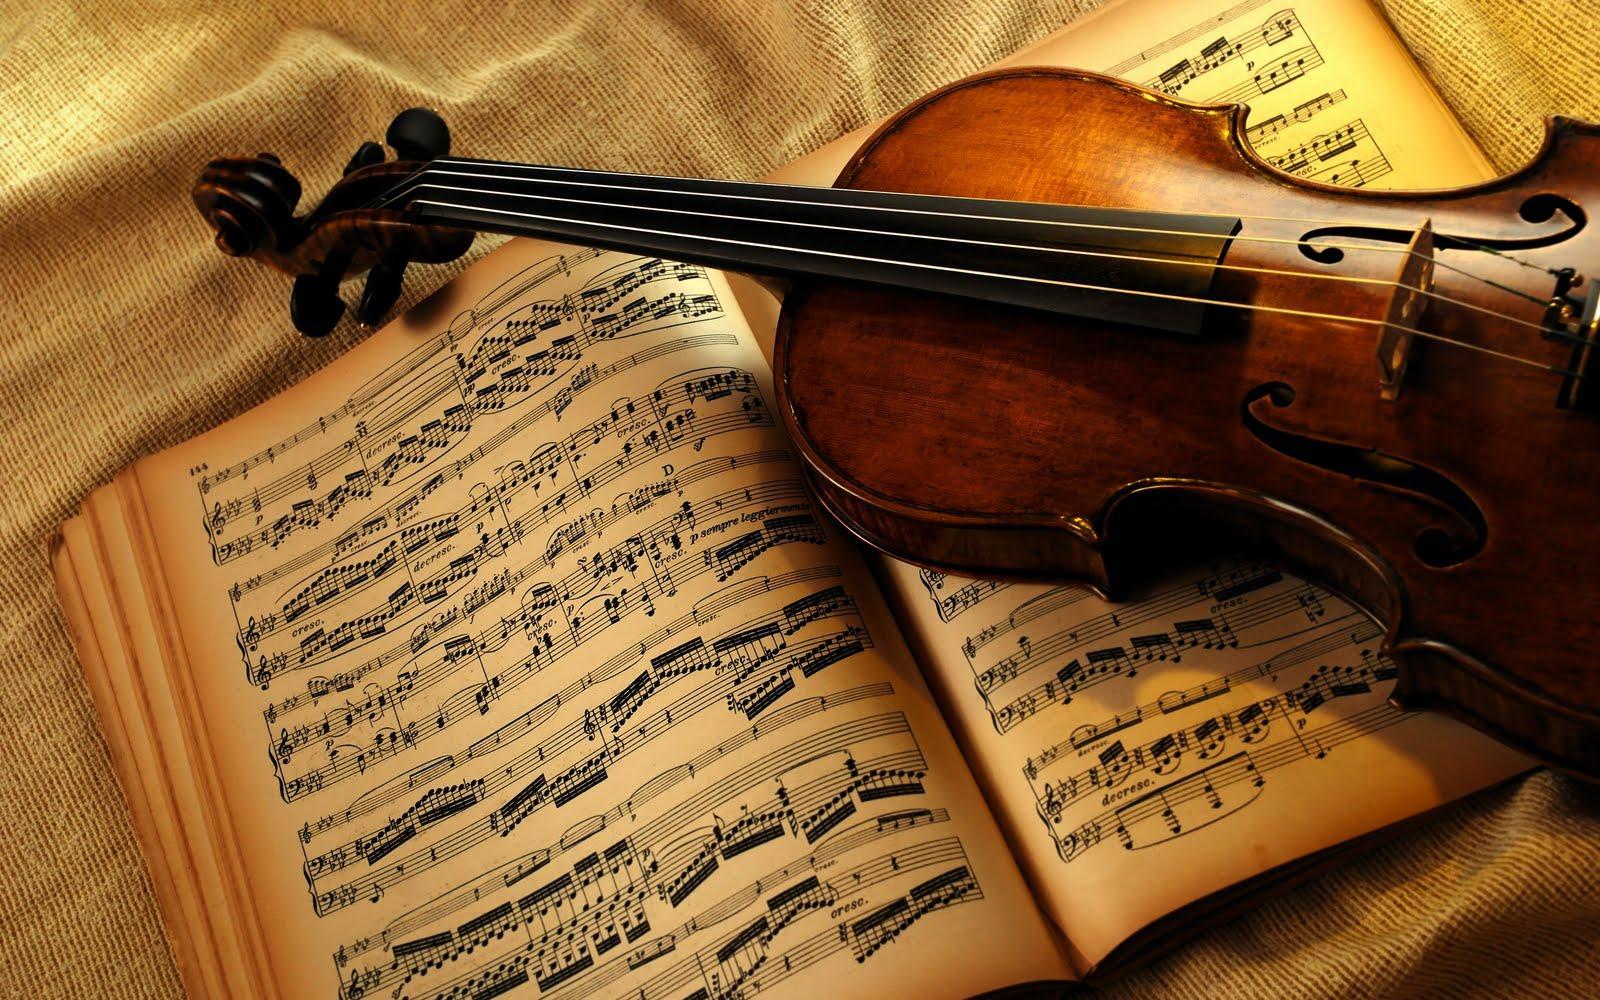 Classical Music Background Wallpaper. High Quality PC Dekstop